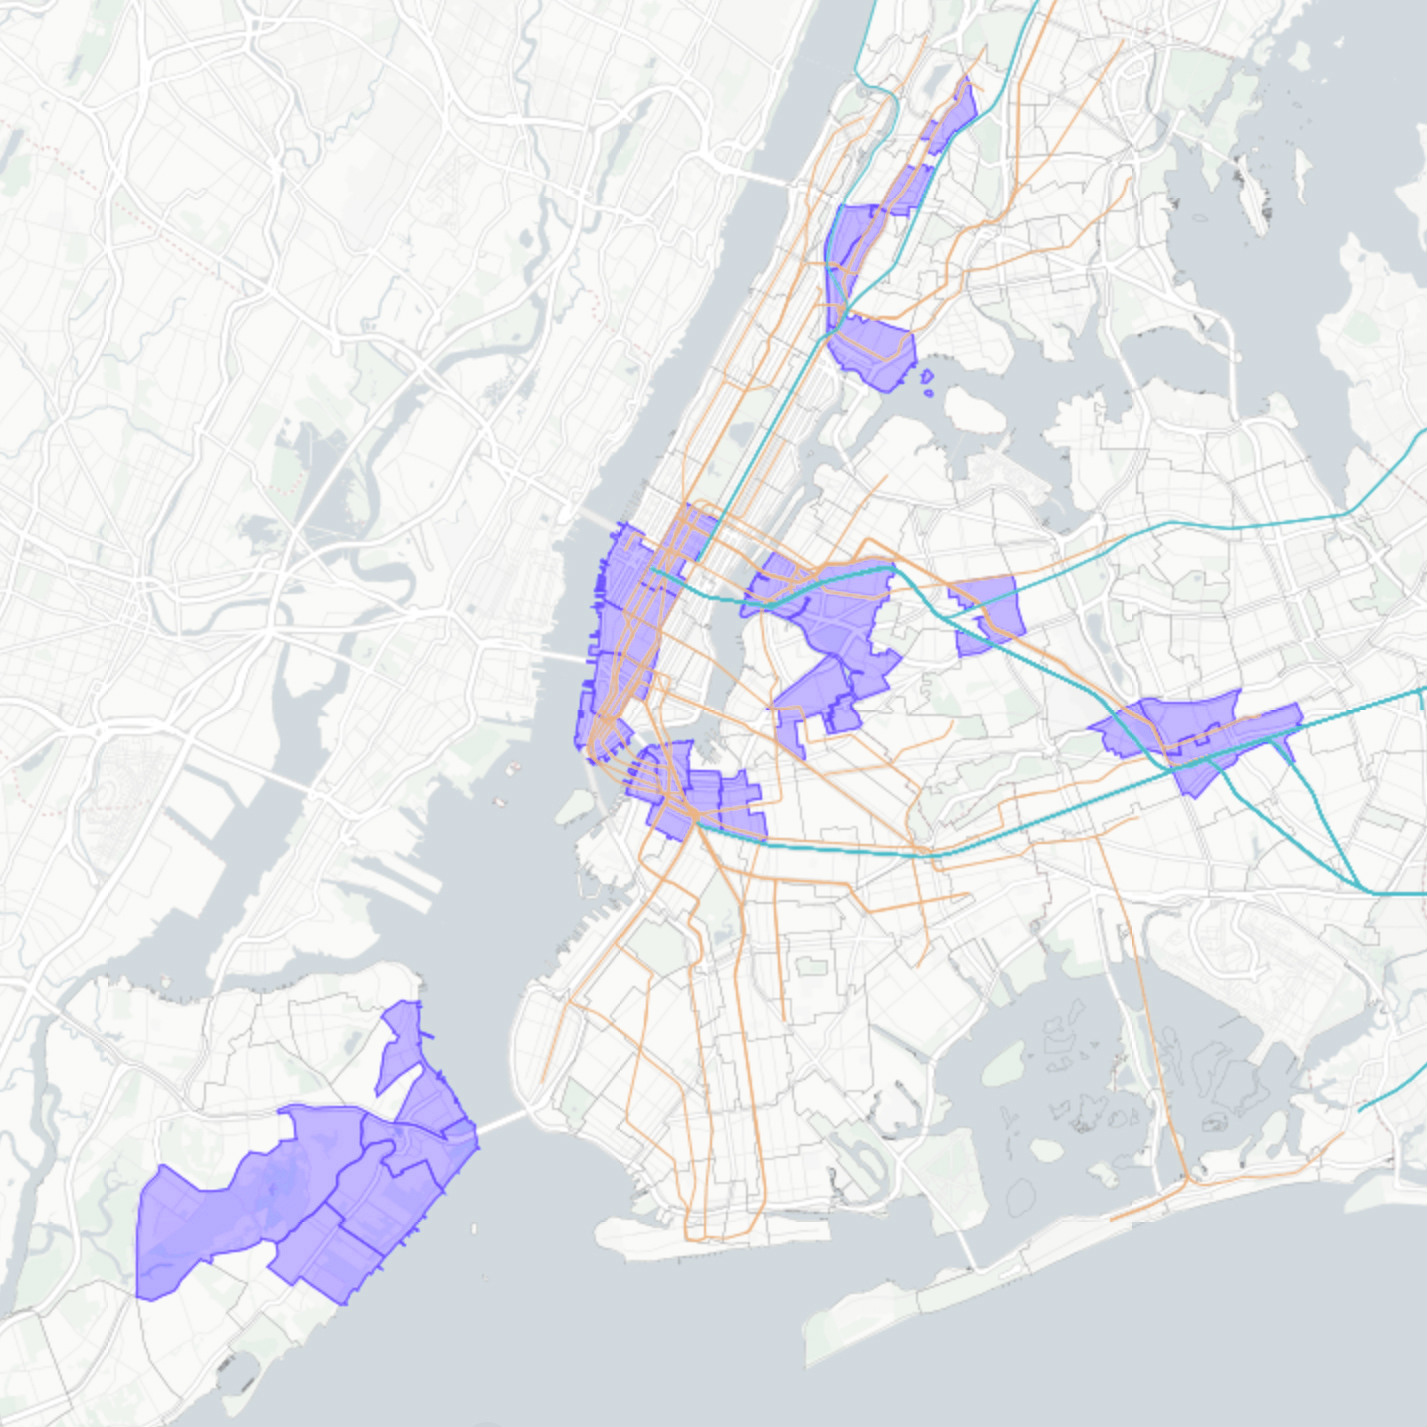 Shaded: each NYC borough’s top 5 most transit-accessible neighborhoods. 